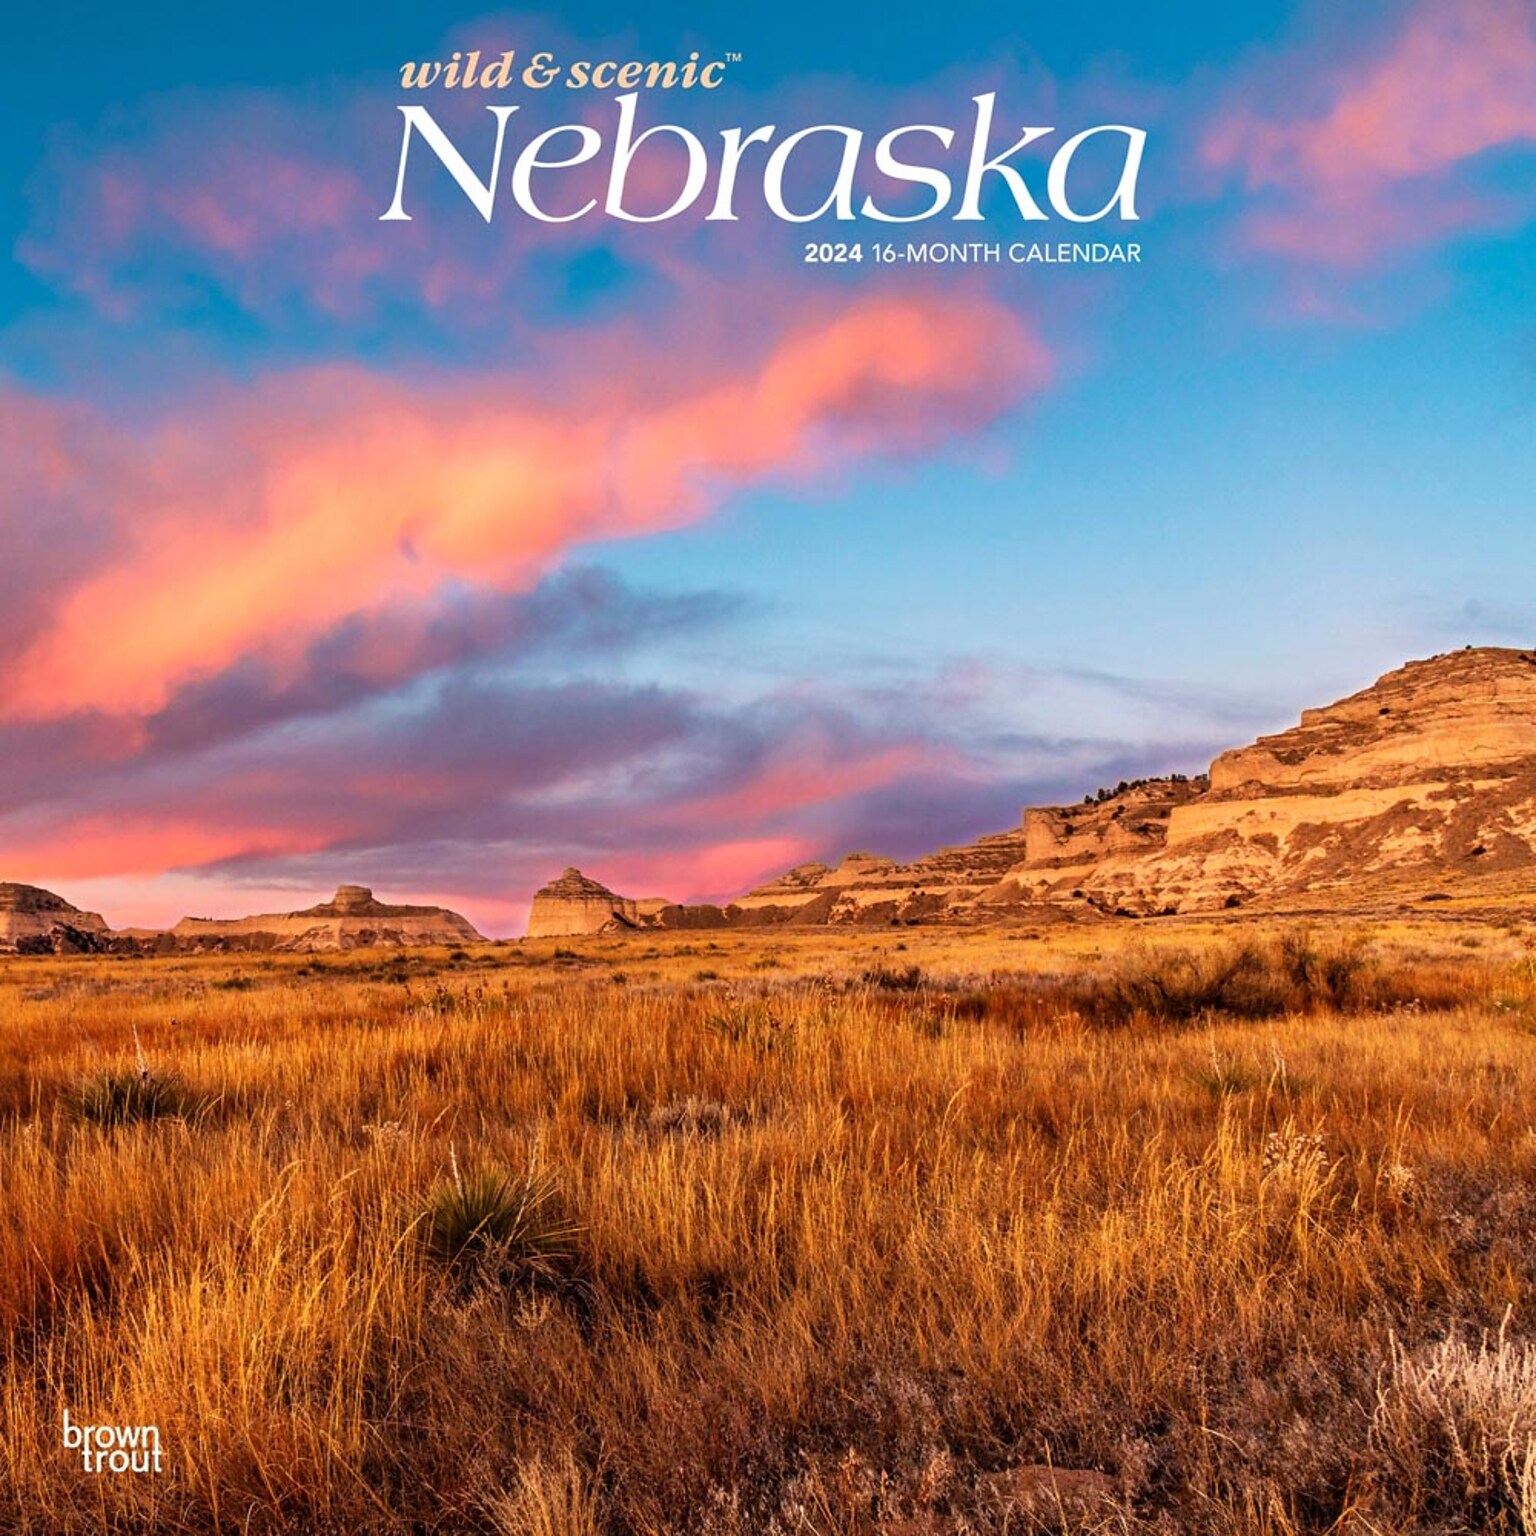 2024 BrownTrout Nebraska Wild & Scenic 12 x 24 Monthly Wall Calendar (9781975464158)